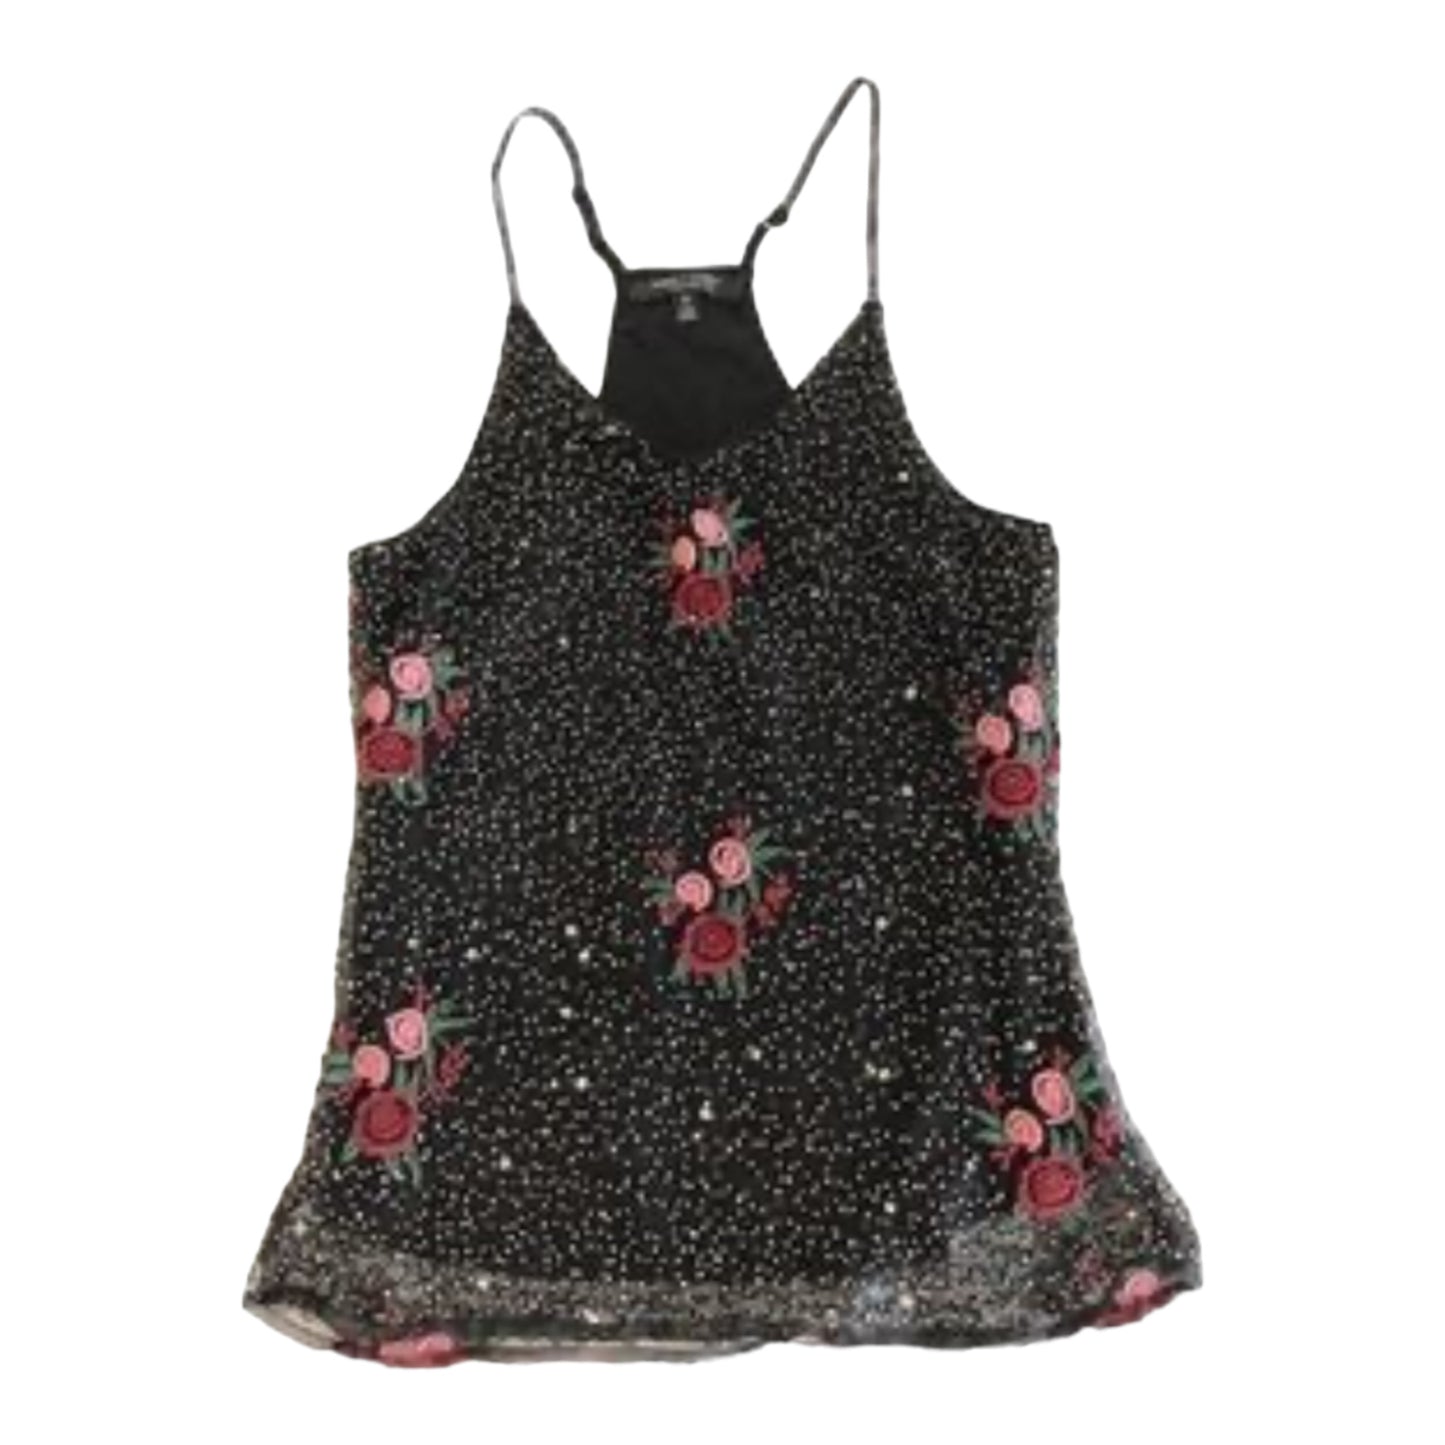 Sequin Tank size M New with tags